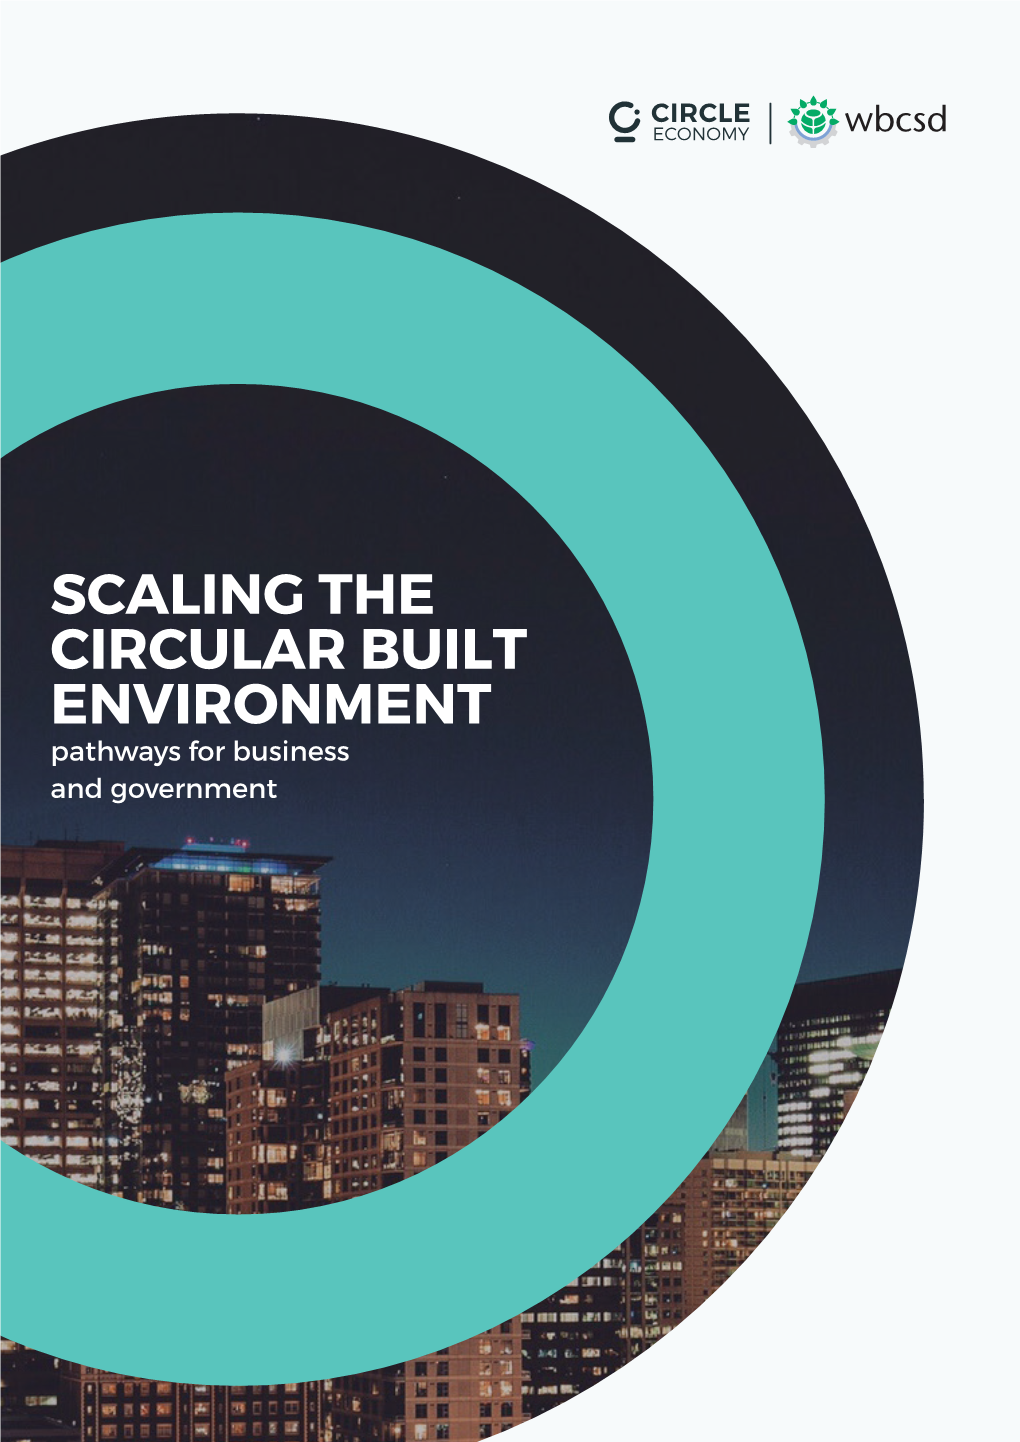 Scaling the Circular Built Environment: Pathways for Business and Government